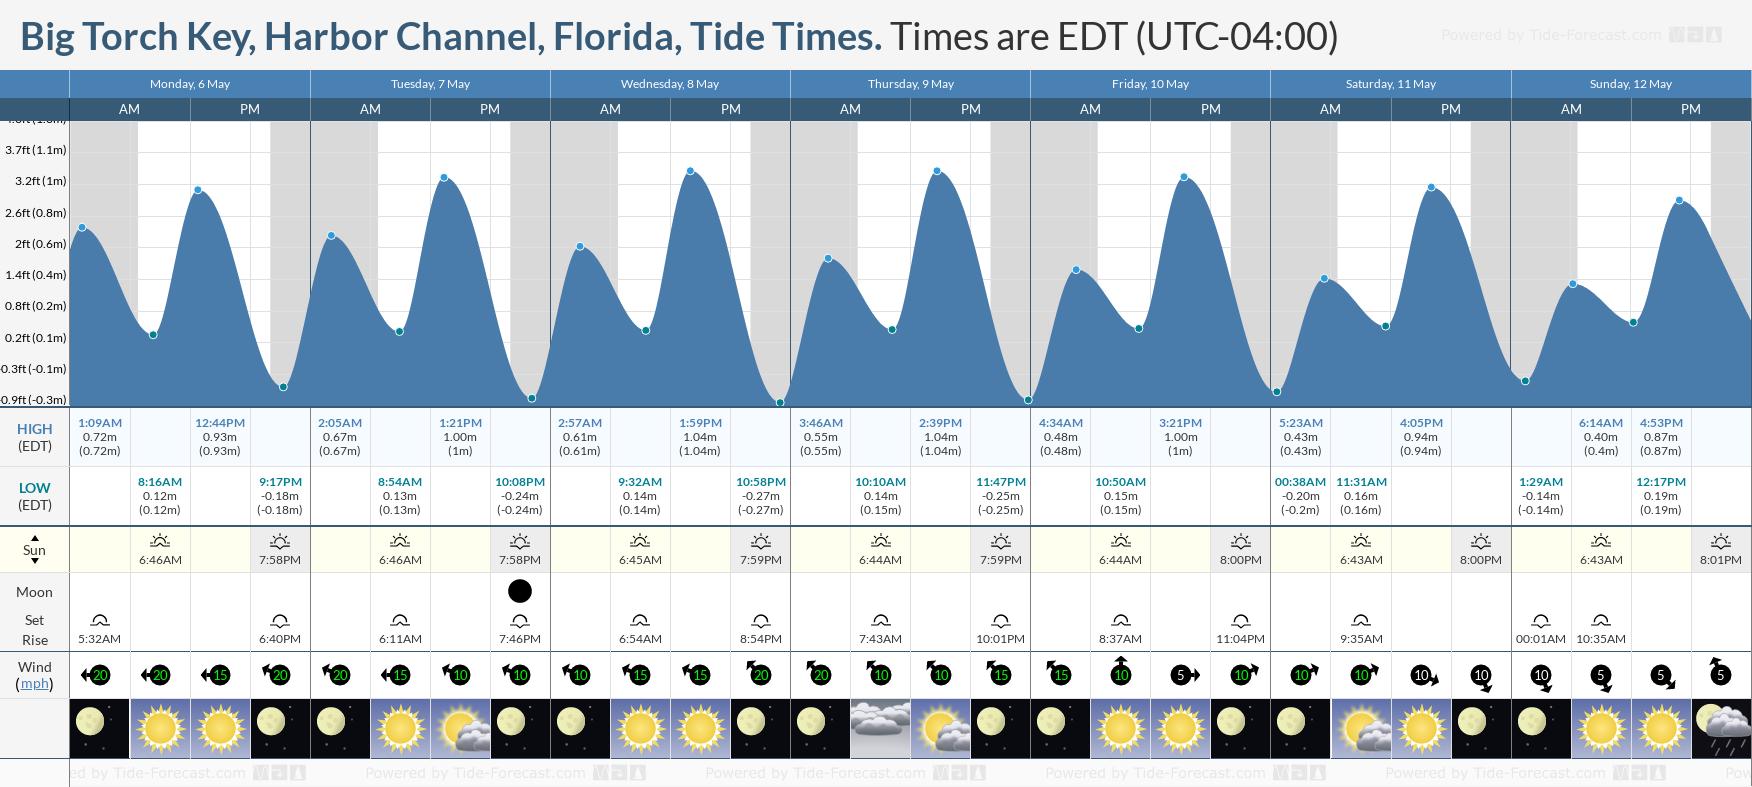 Big Torch Key, Harbor Channel, Florida Tide Chart including high and low tide tide times for the next 7 days